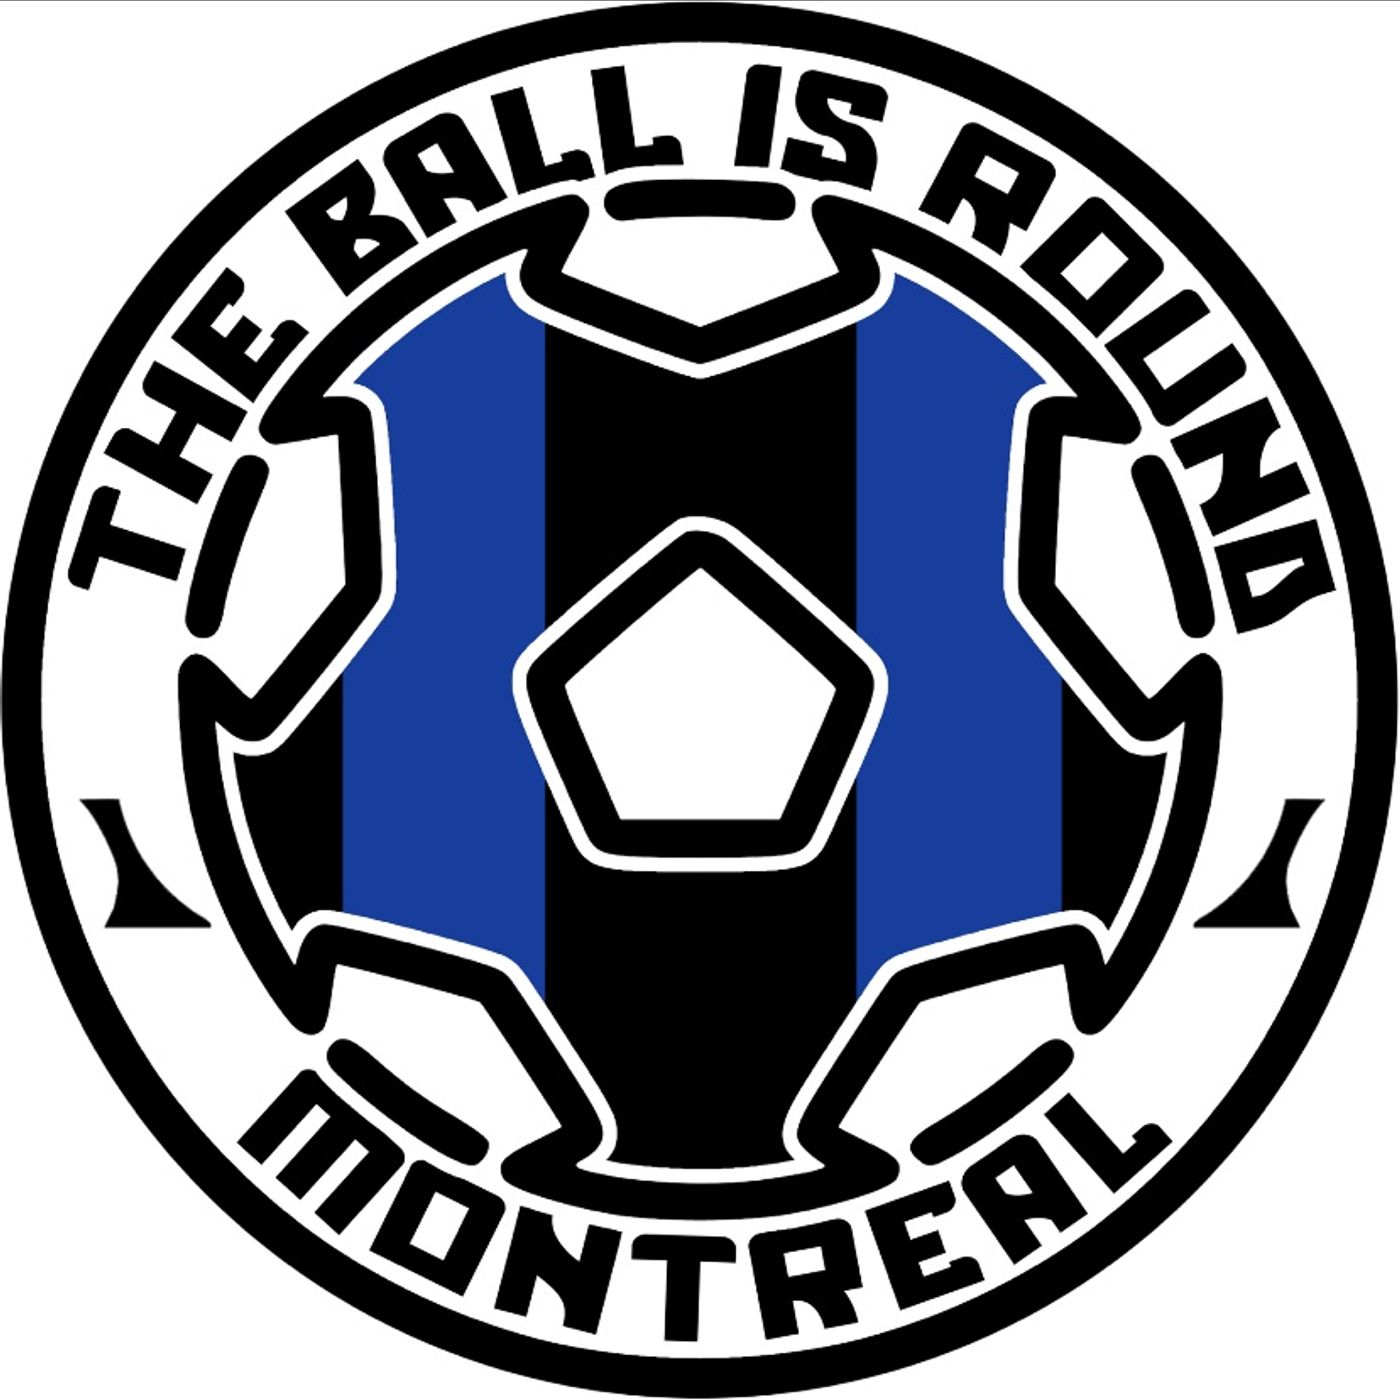 The Ball is Round - Episode 178 - Humiliation in Nashville